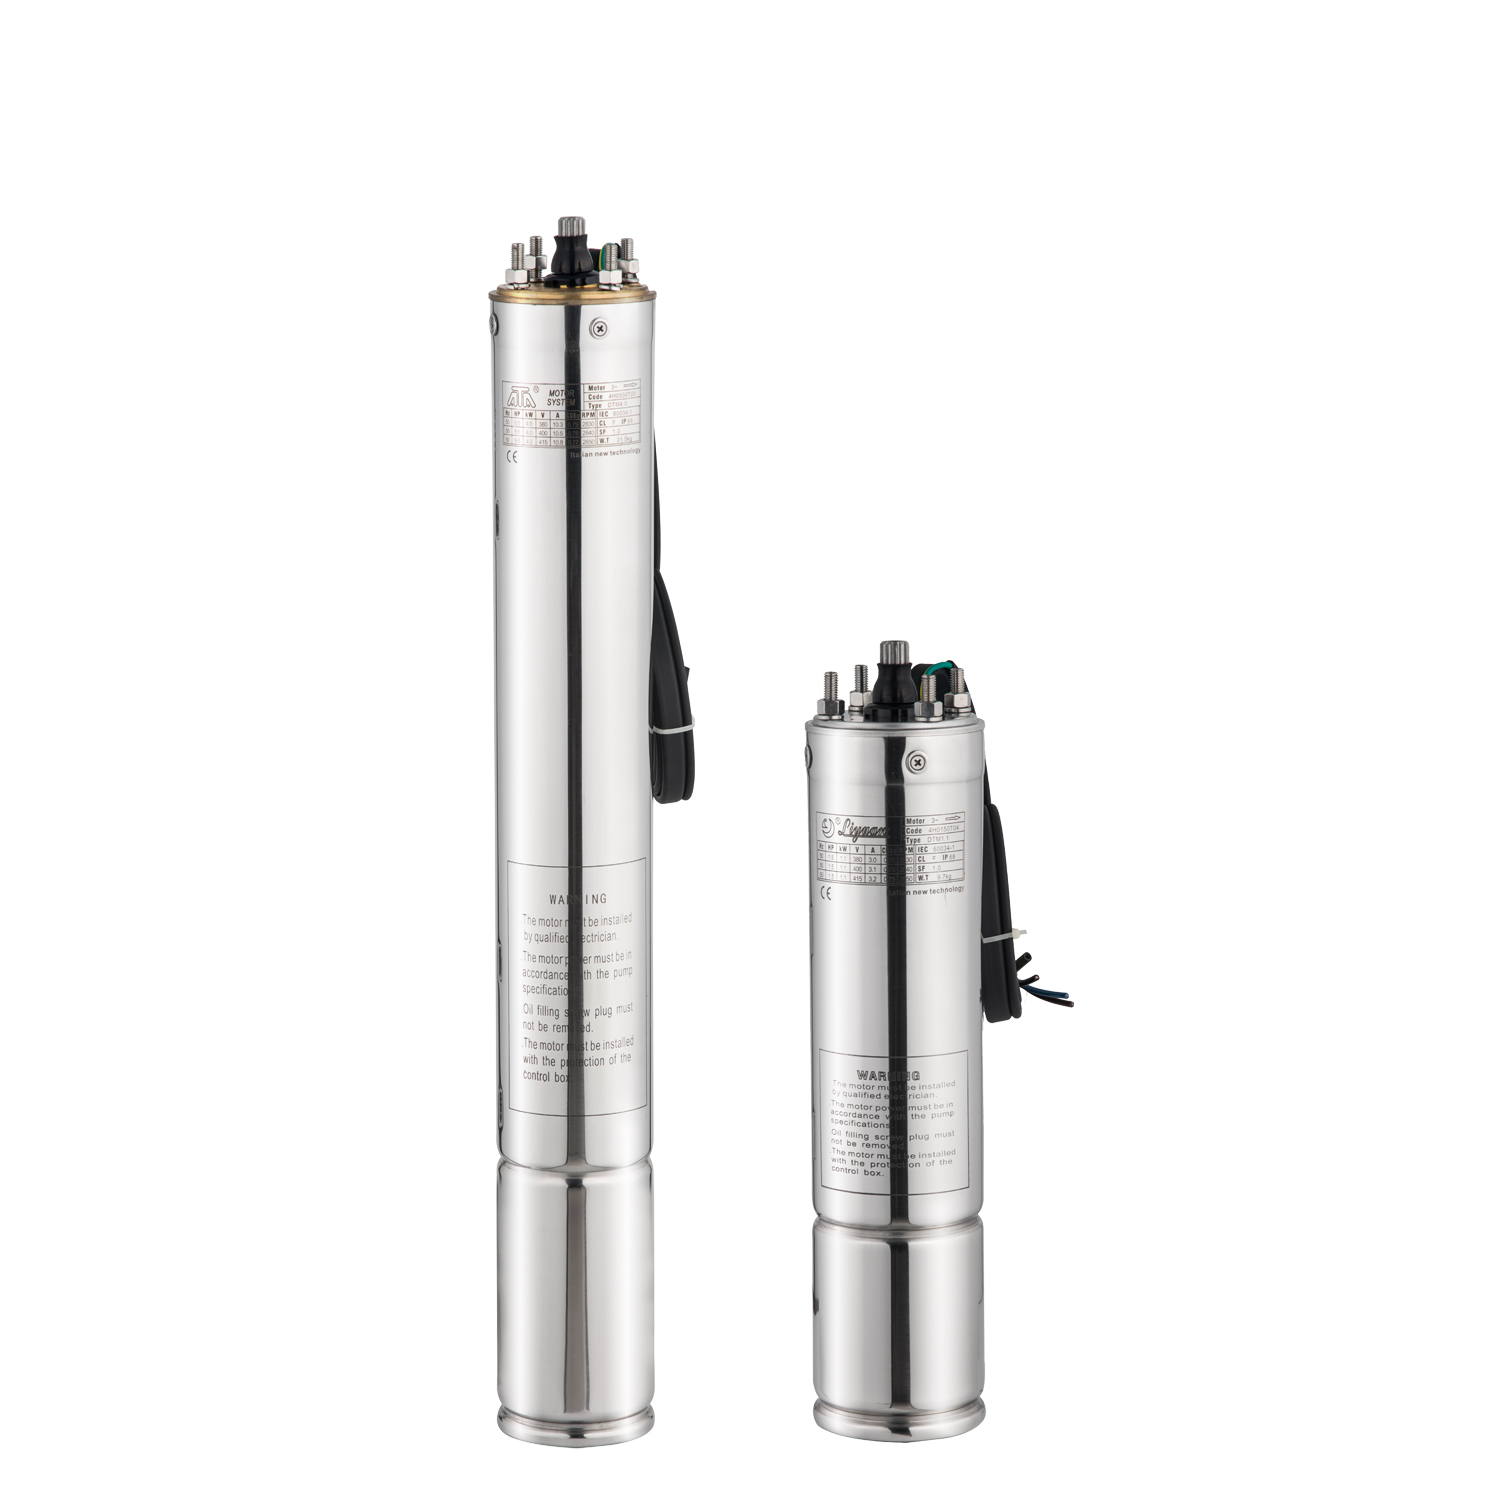 5inch Stainless Steel Impeller Solar Powered Centrifugal Submersible Pump, Solar Water Pumping Systems, Brushless DC Motor, with MPPT Controller